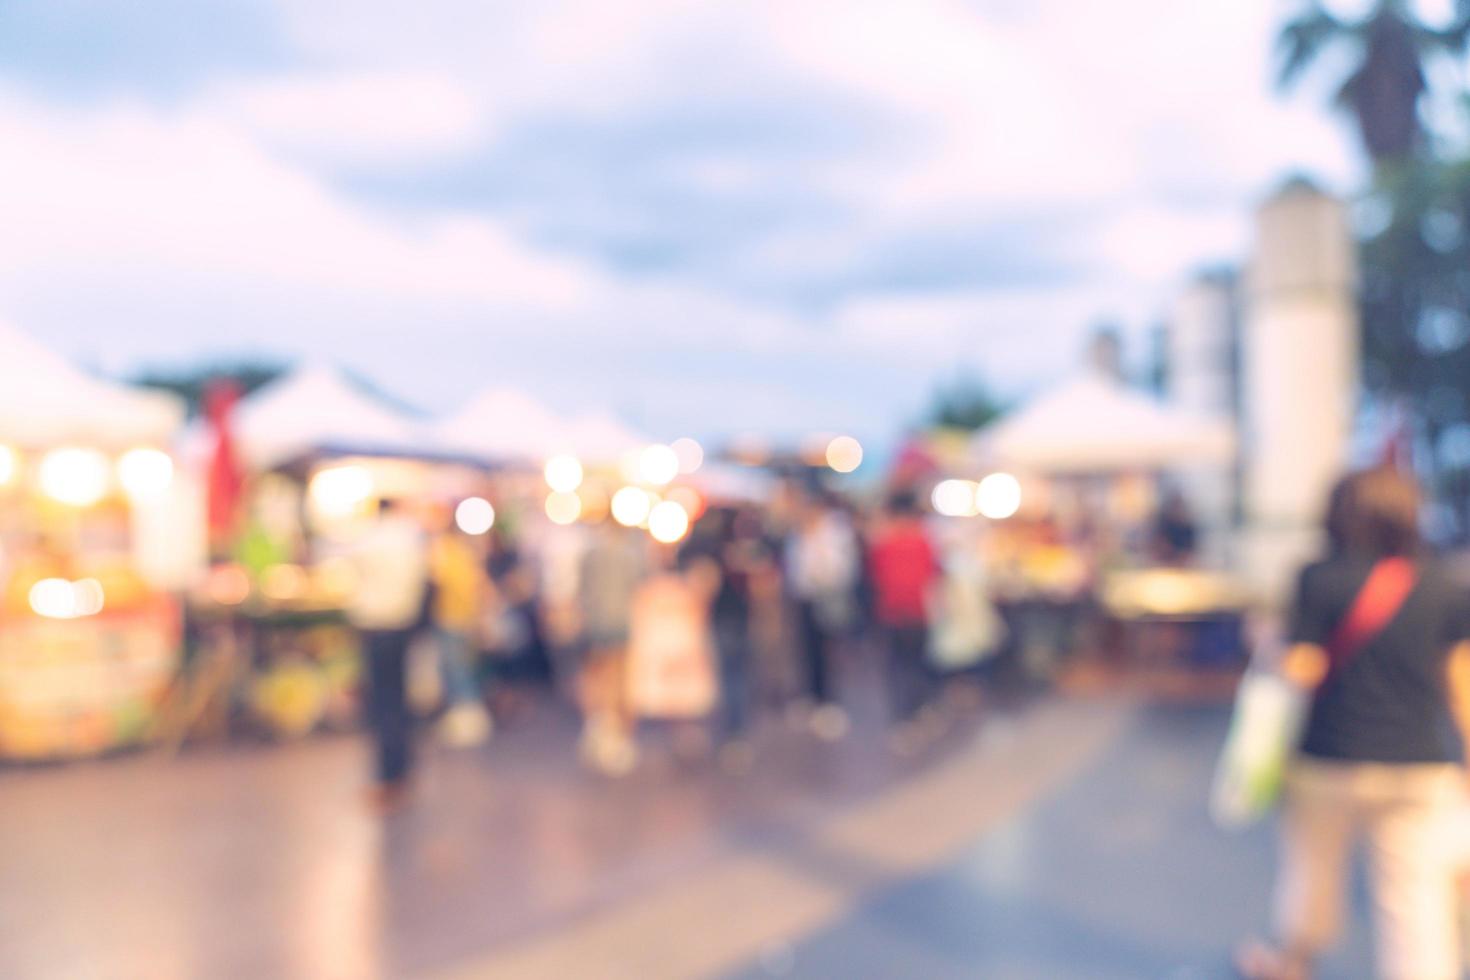 Abstract blur background in night market at shopping mall for background, Vintage toned. photo